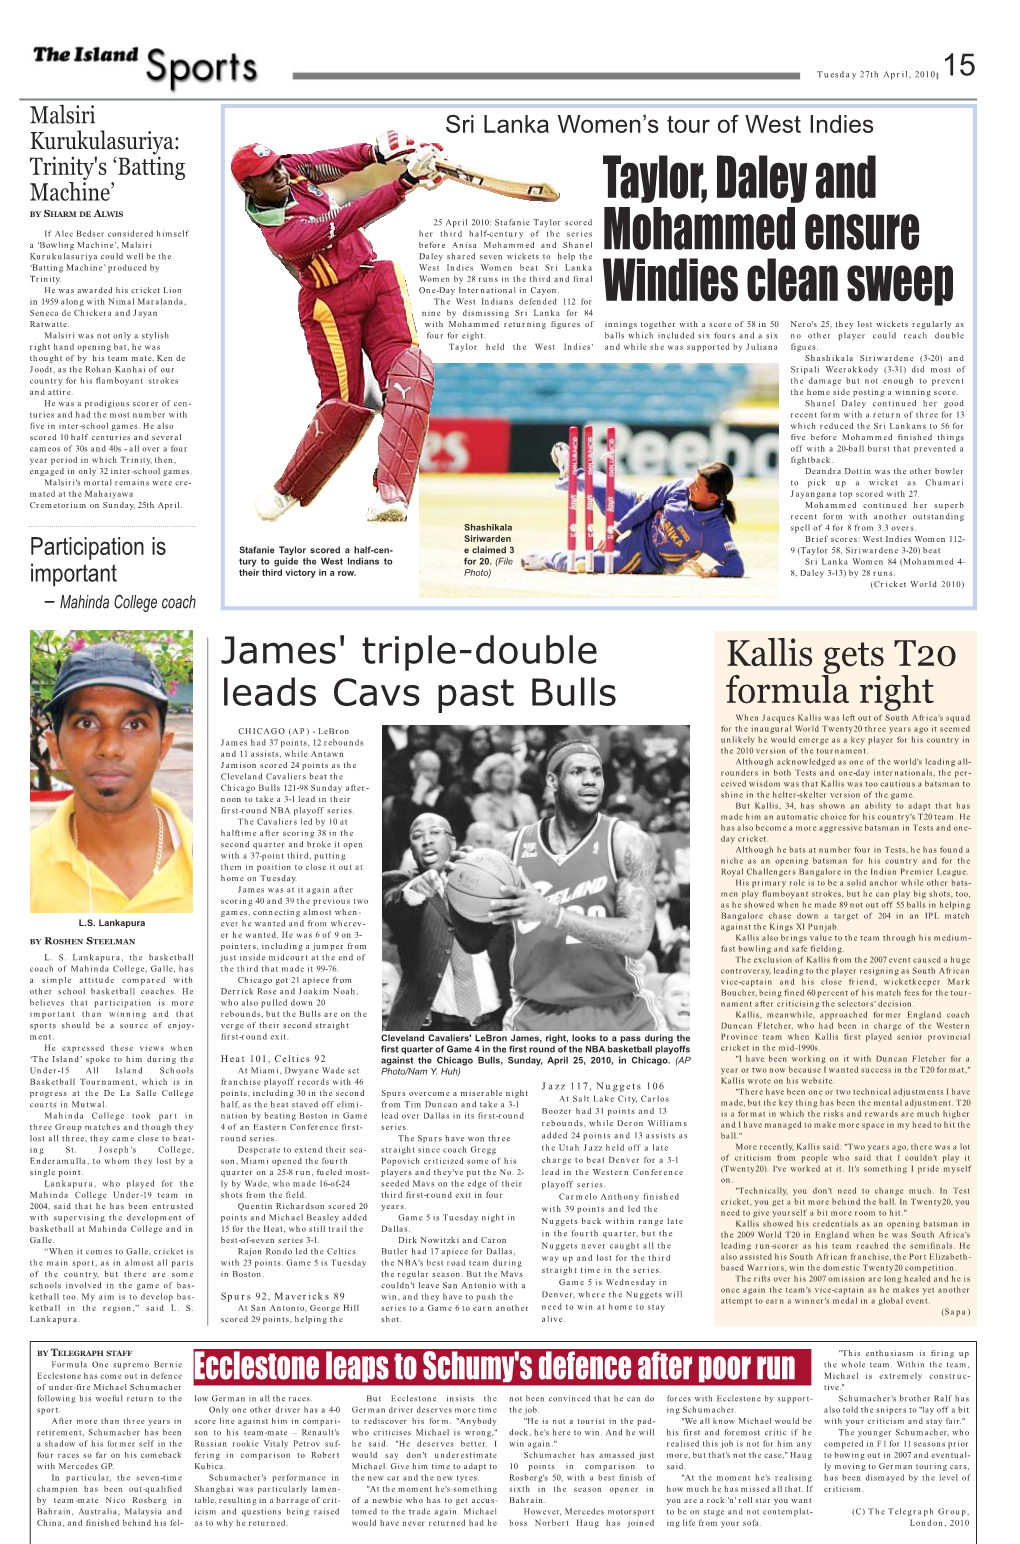 Taylor, Daley and Mohammed Ensure Windies Clean Sweep